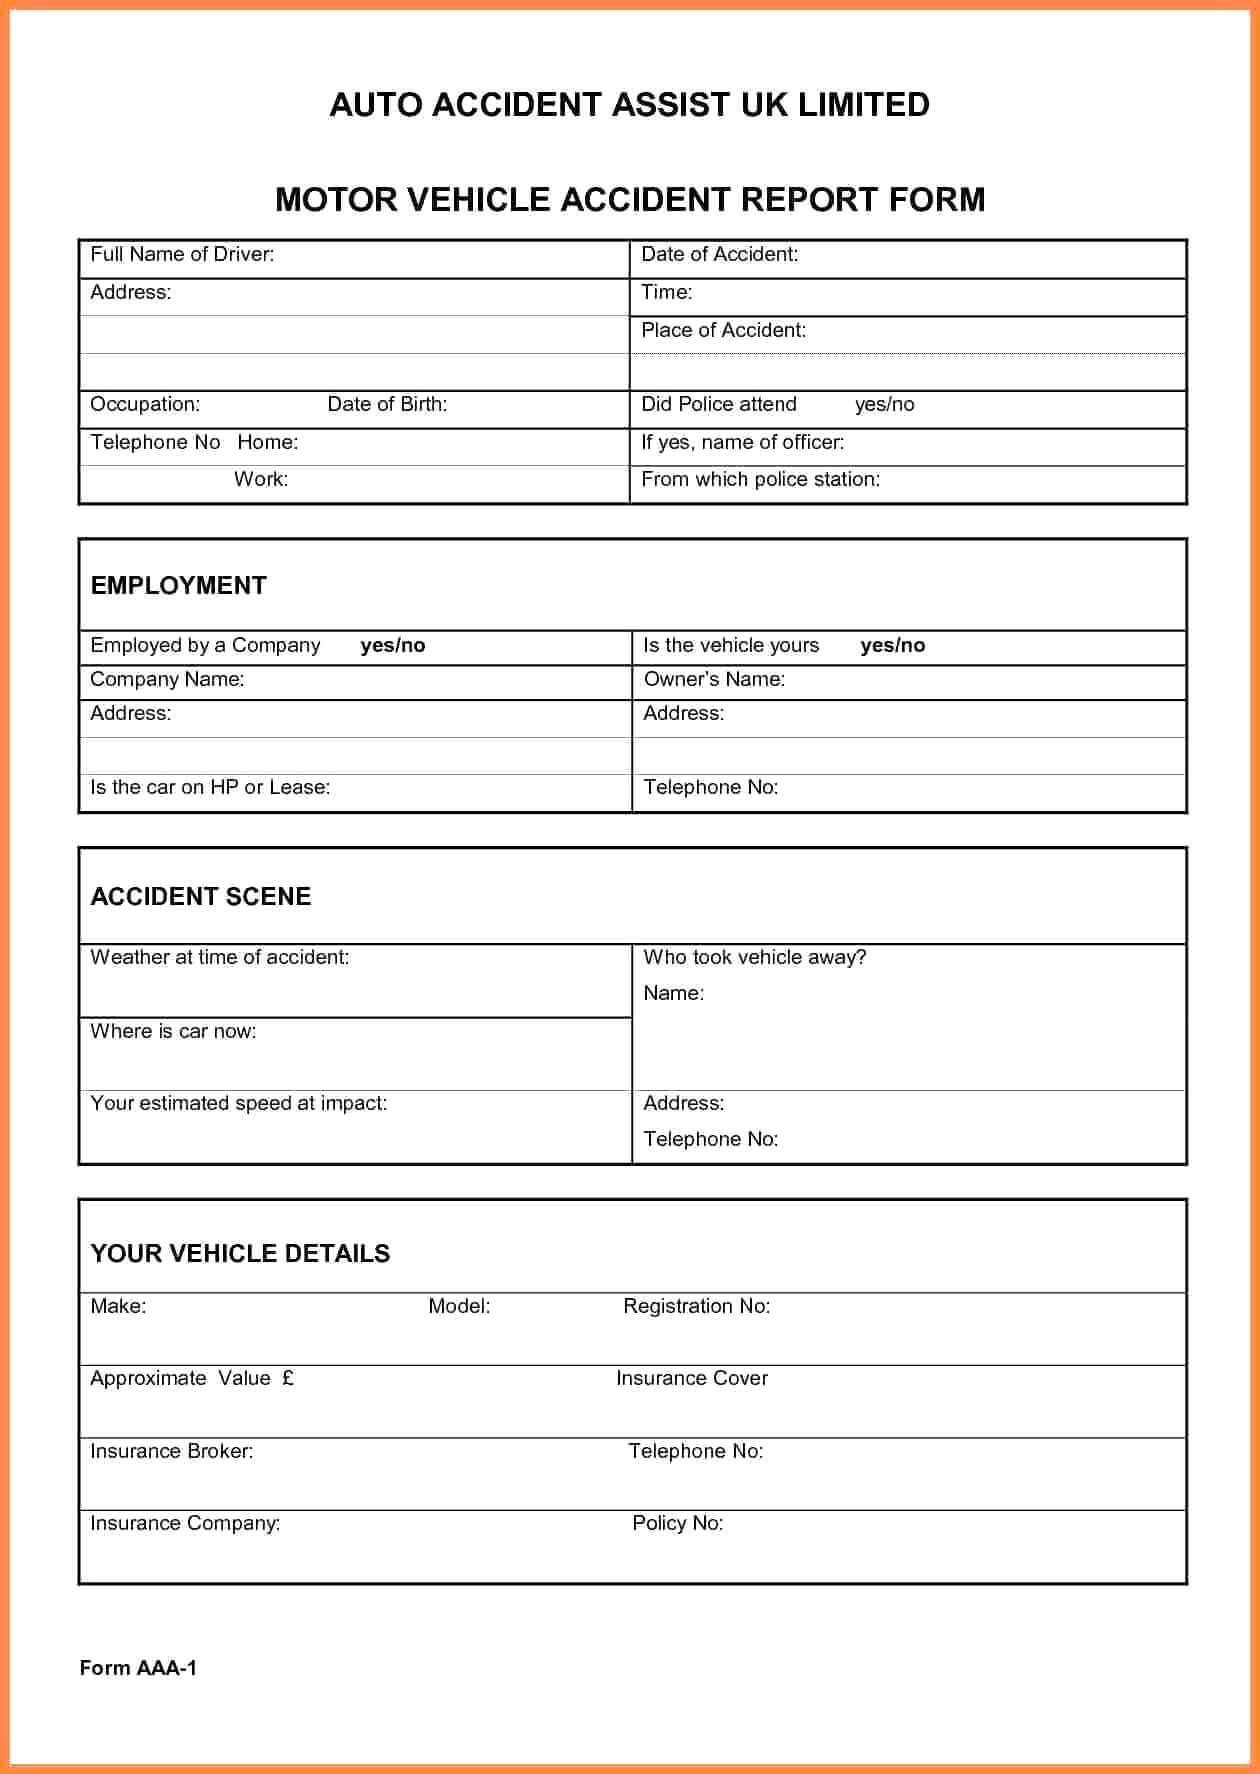 Accident Record Book Template – Tophatsheet.co With Incident Report Book Template